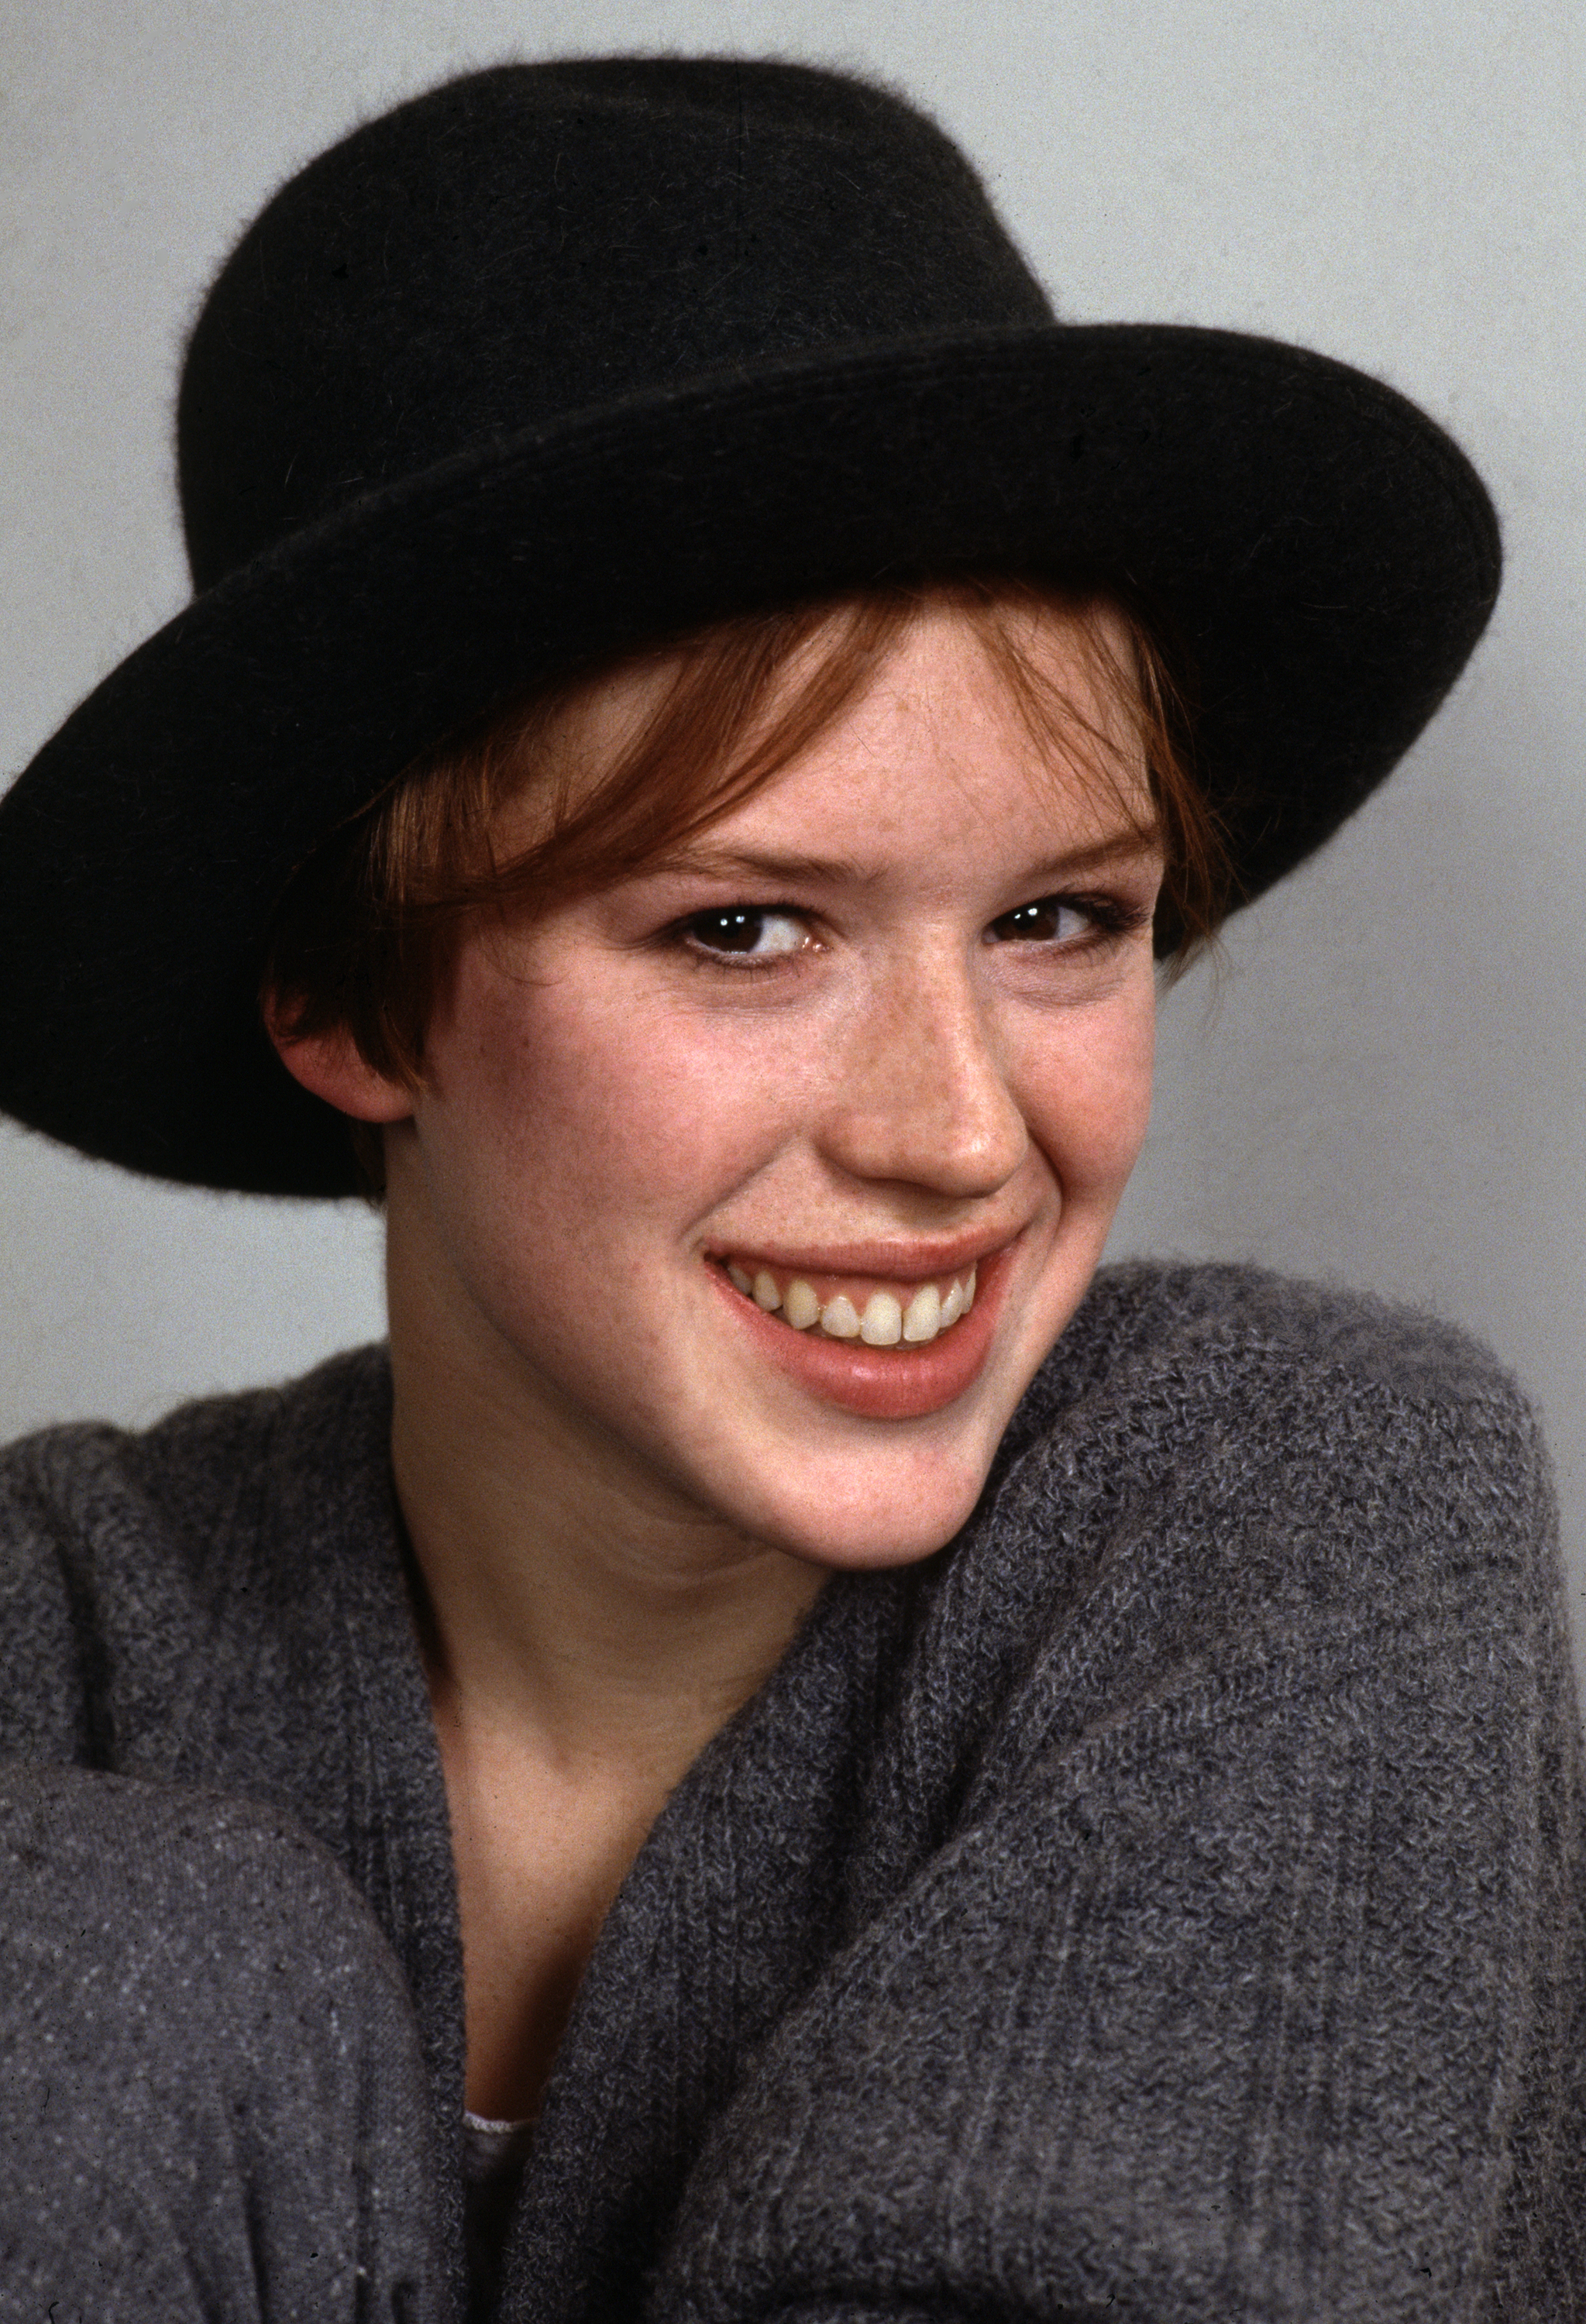 Molly Ringwald in Los Angeles, California on January 30, 1985. | Source: Getty Images